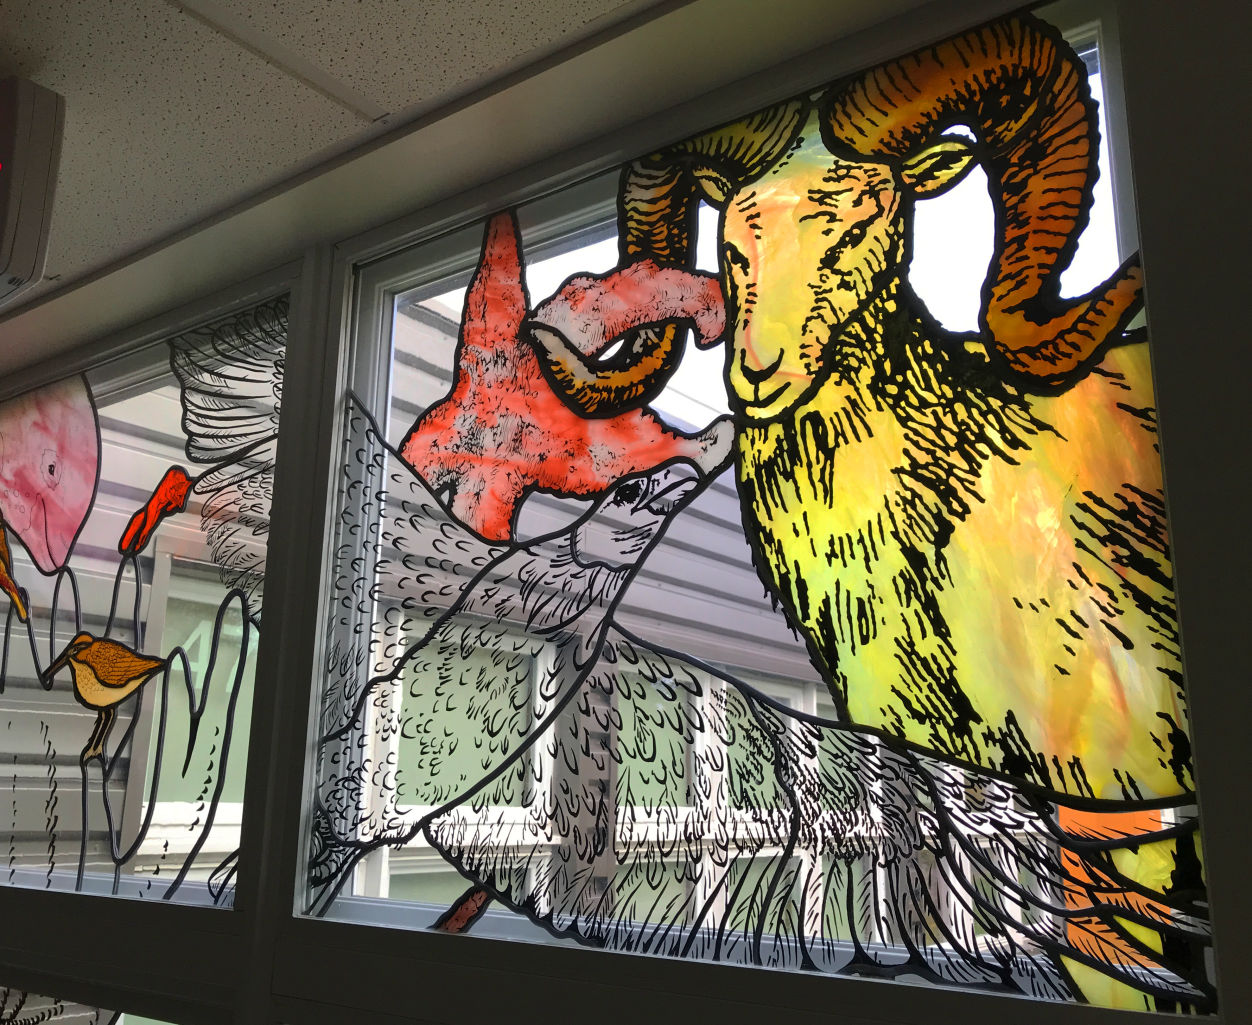 "See Us Now" - A stained glass window bay at Turnagain Elementary, Anchorage, AK